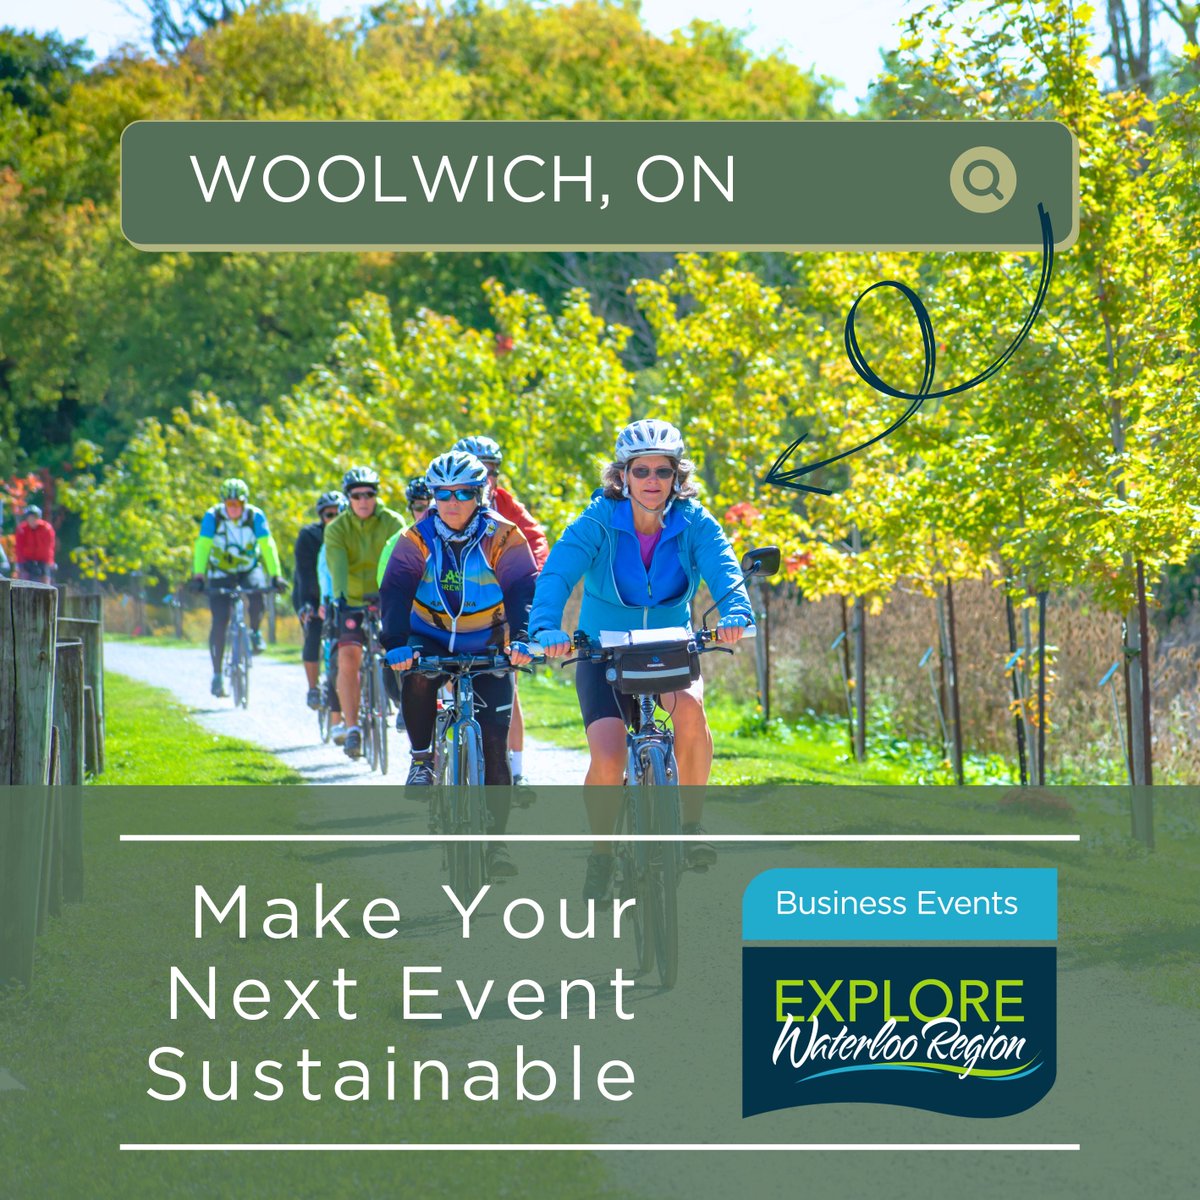 Celebrating #SustainableSunday in #WaterlooRegion, a leader in eco-friendly commuting with extensive #bike trails. Plan your #event with us and advance towards a #sustainable future. Join our green #journey! Learn more: bit.ly/4cHnDXR #CSR #EcoEvent #ExploreWR